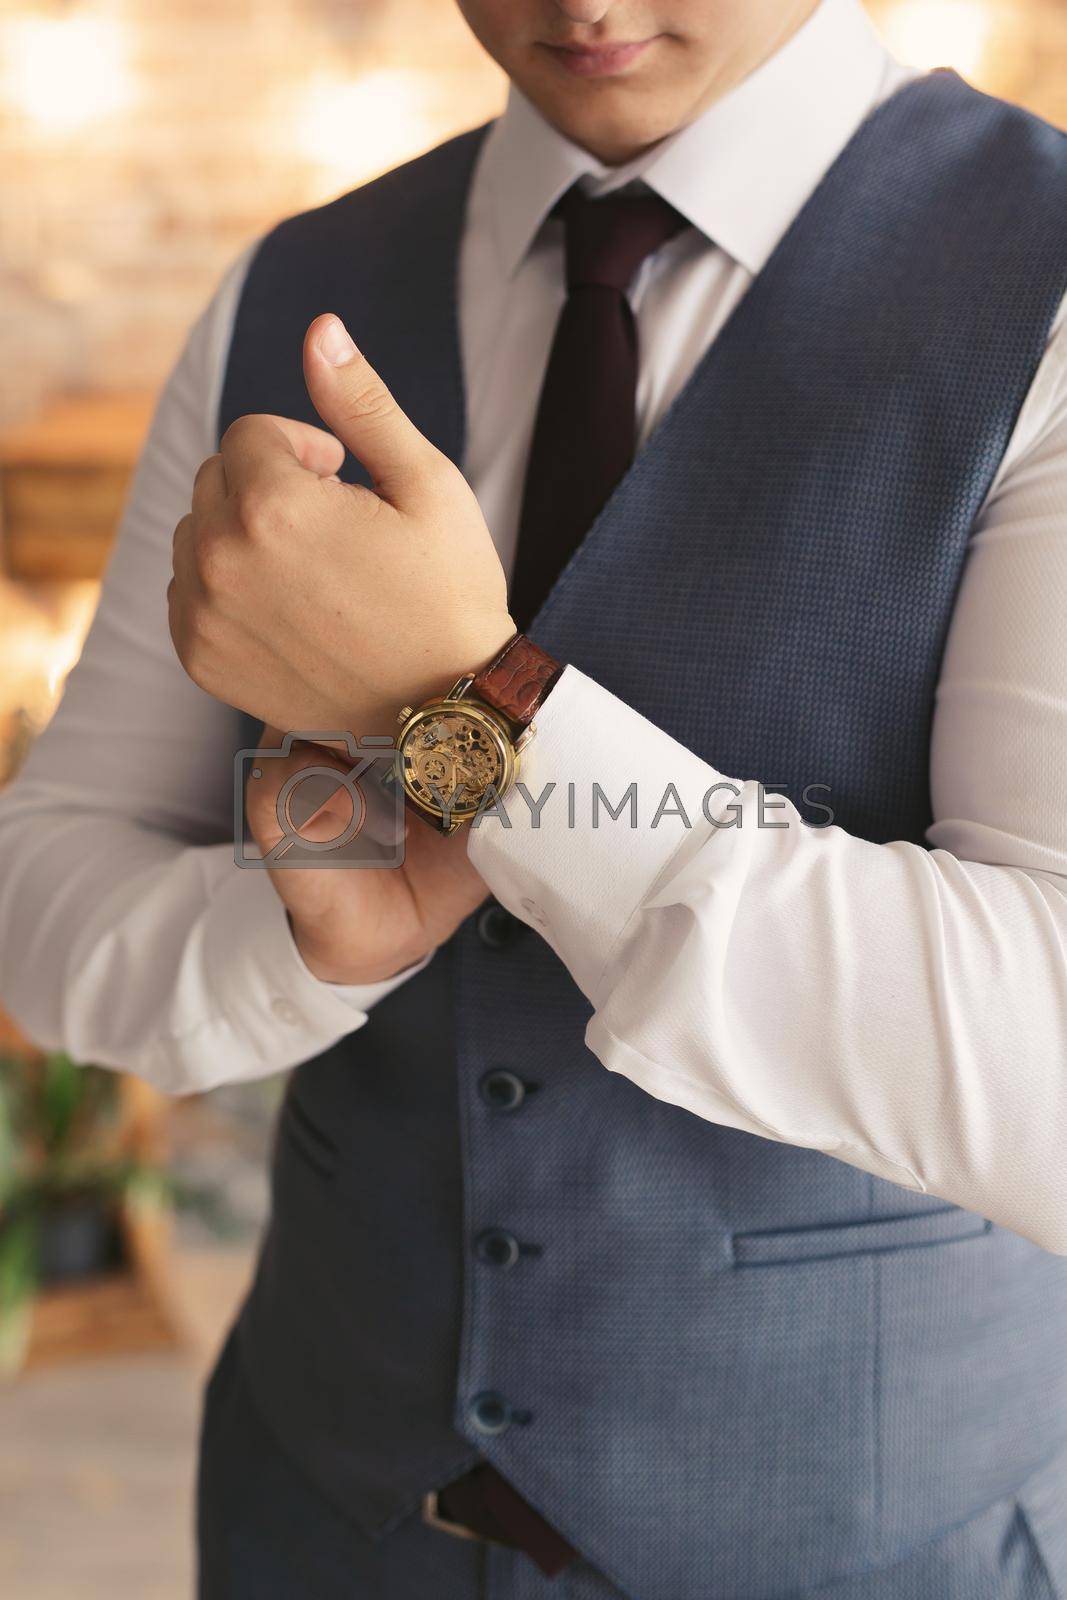 Royalty free image of Close-up hands of the groom with a clock. by StudioPeace